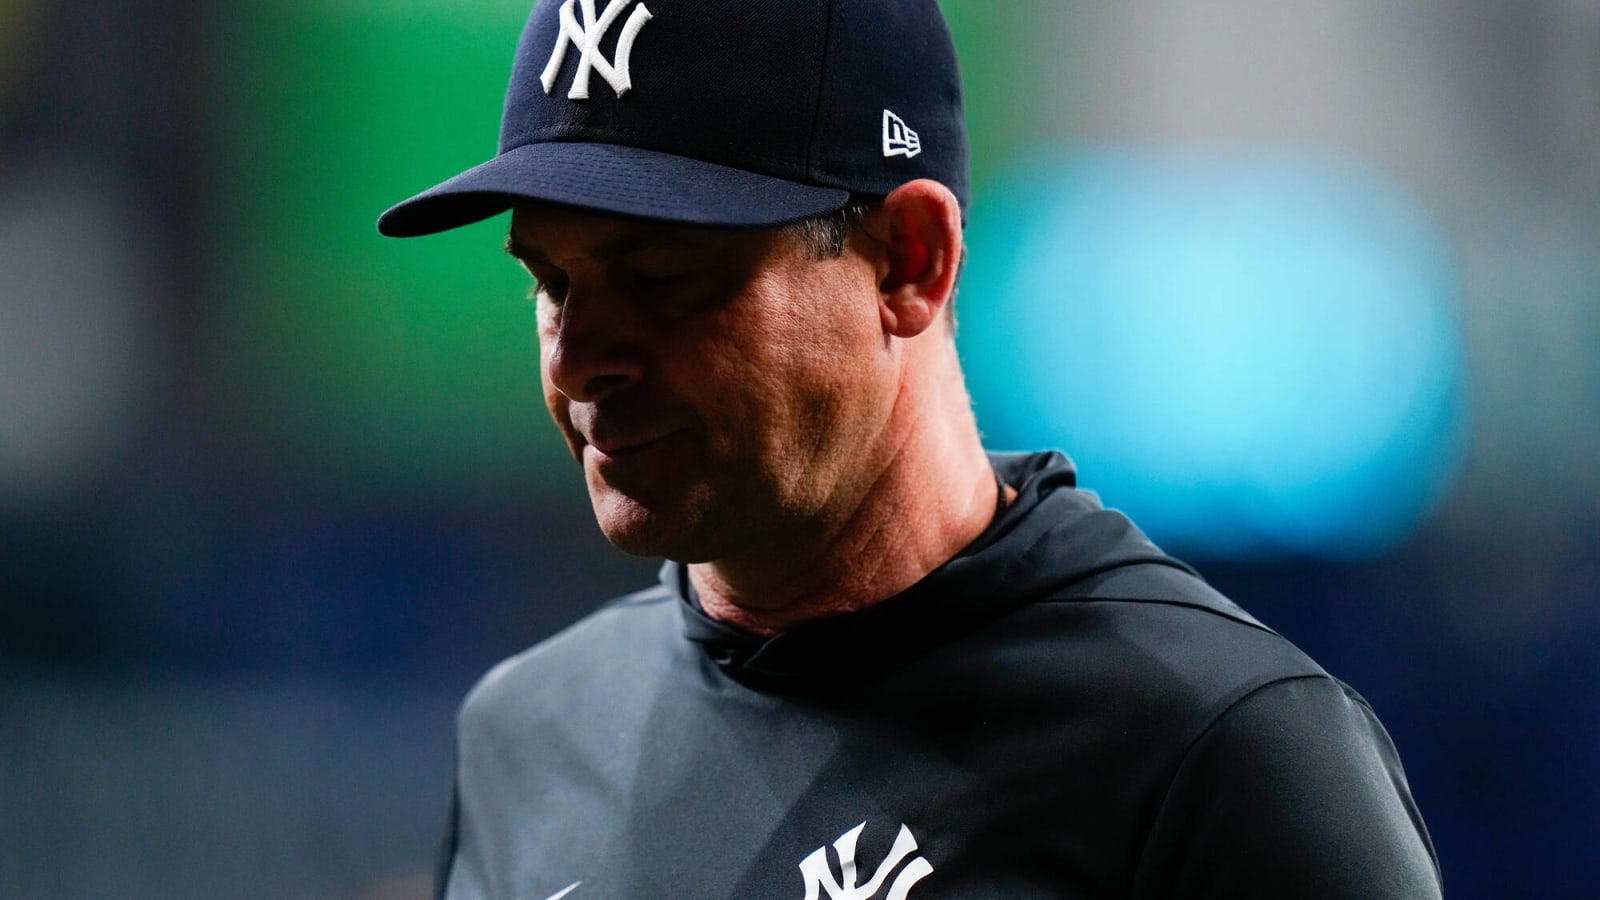 The Yankees face one big problem that will determine their season